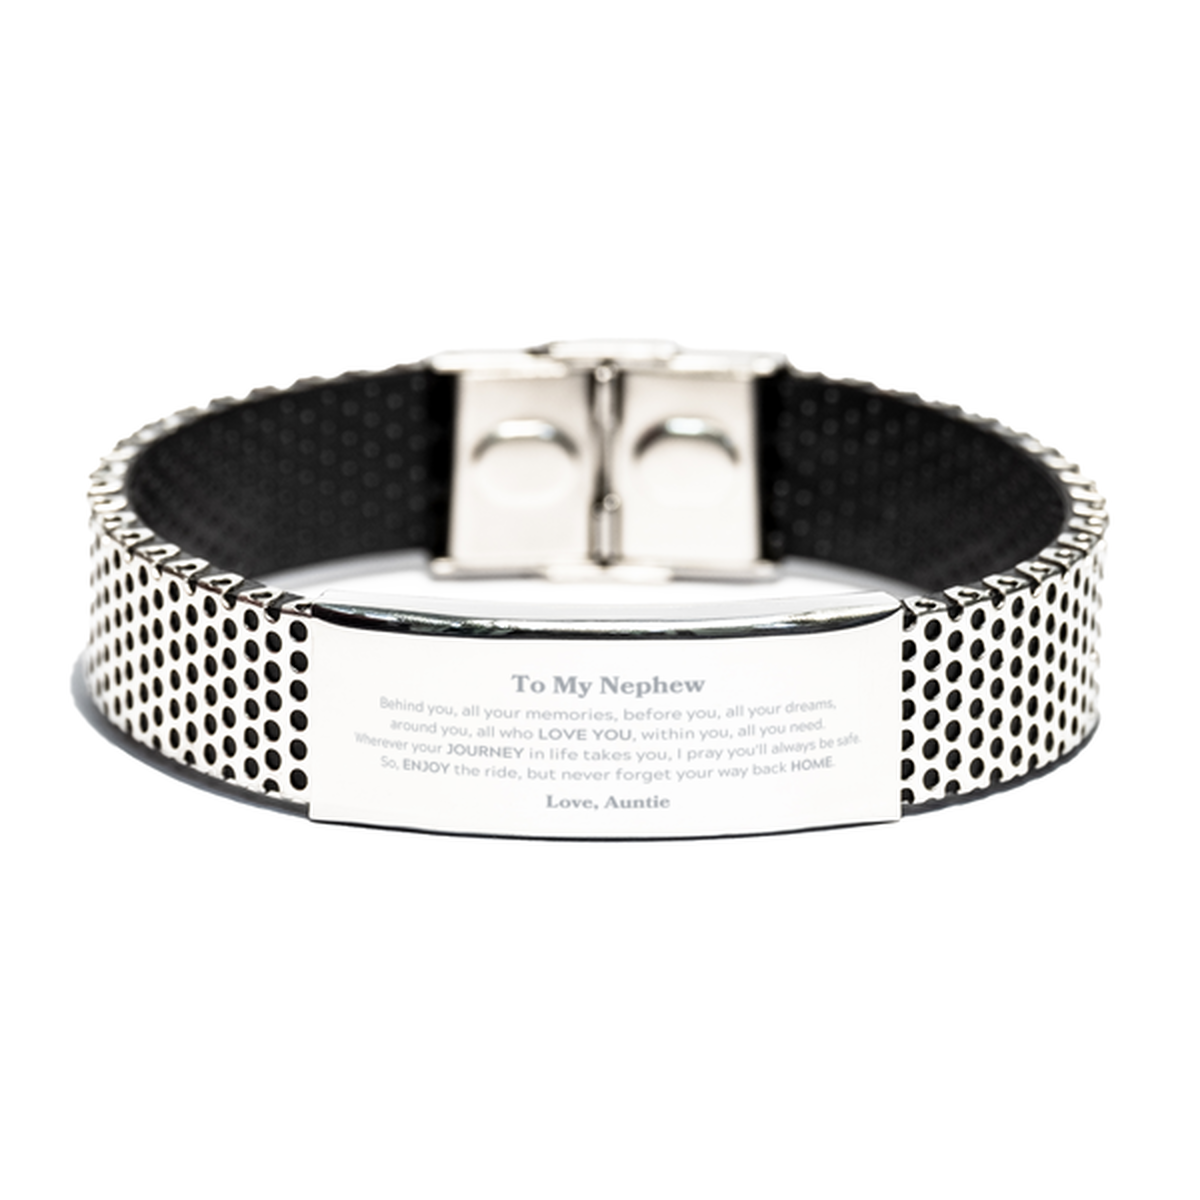 To My Nephew Graduation Gifts from Auntie, Nephew Stainless Steel Bracelet Christmas Birthday Gifts for Nephew Behind you, all your memories, before you, all your dreams. Love, Auntie